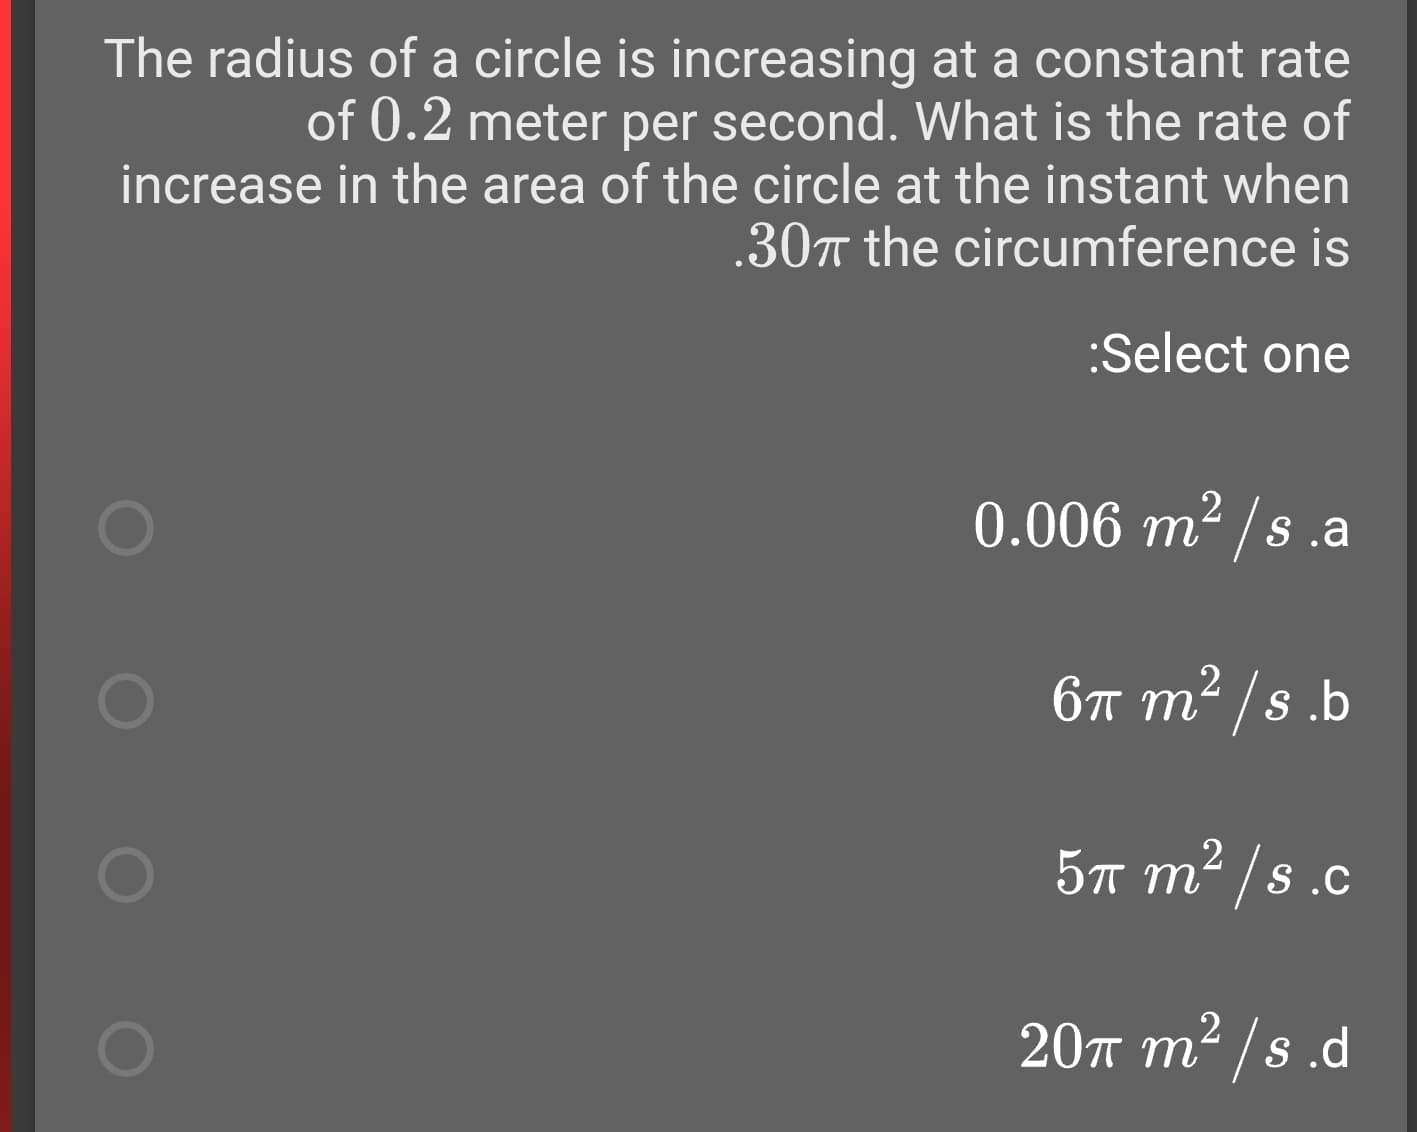 The radius of a circle is increasing at a constant rate
of 0.2 meter per second. What is the rate of
increase in the area of the circle at the instant when
.30T the circumference is
:Select one
